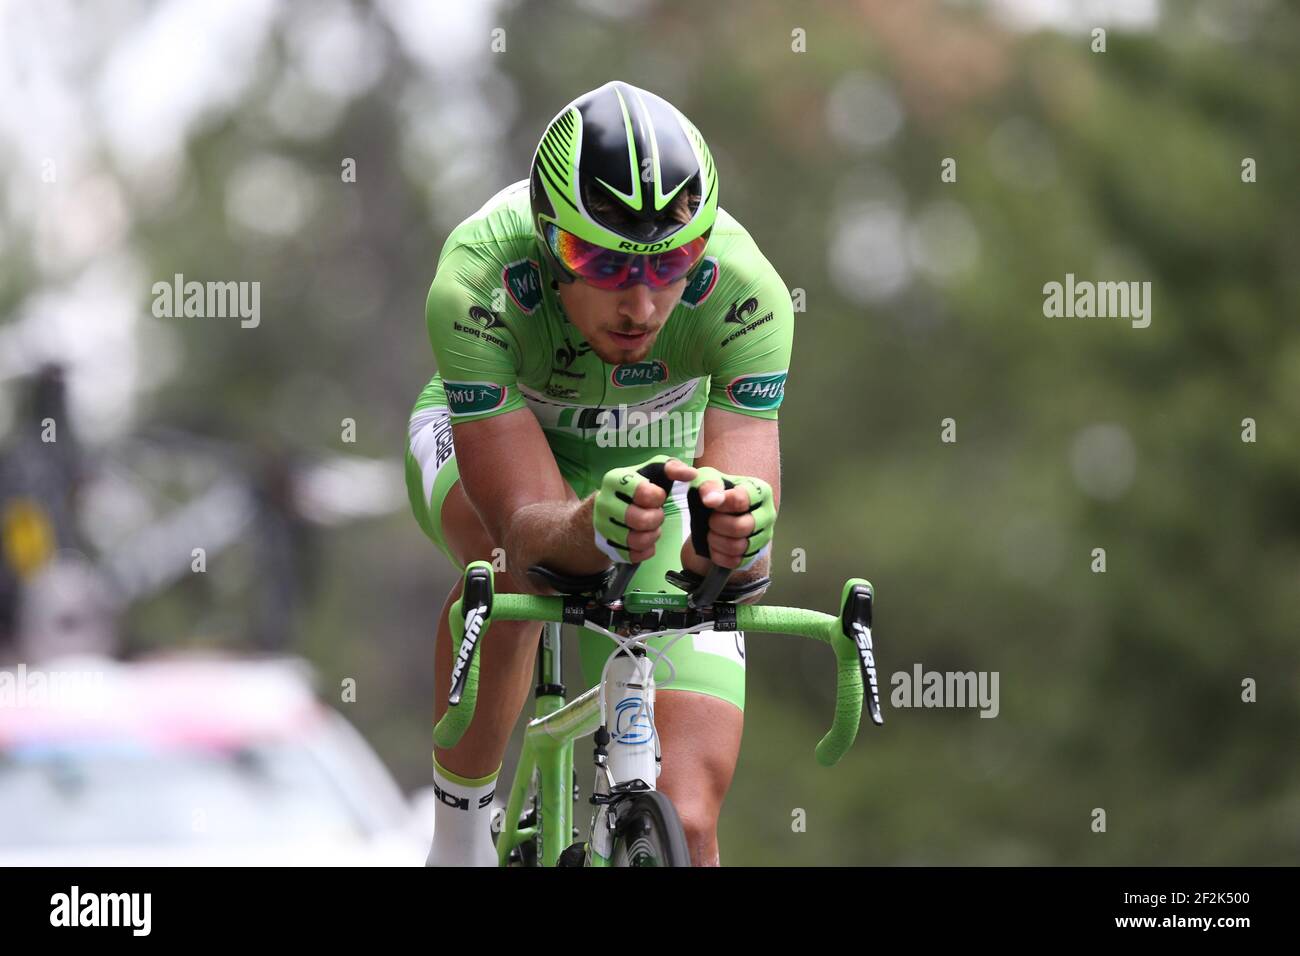 Cycling - UCI World Tour - Tour de France 2013 - Stage 17 - Individual Time Trial - Embrun - Chorges (32 km) - 17/07/2013 - Photo MANUEL BLONDEAU / DPPI - Peter Sagan of Slovakia and Team Cannondale Stock Photo